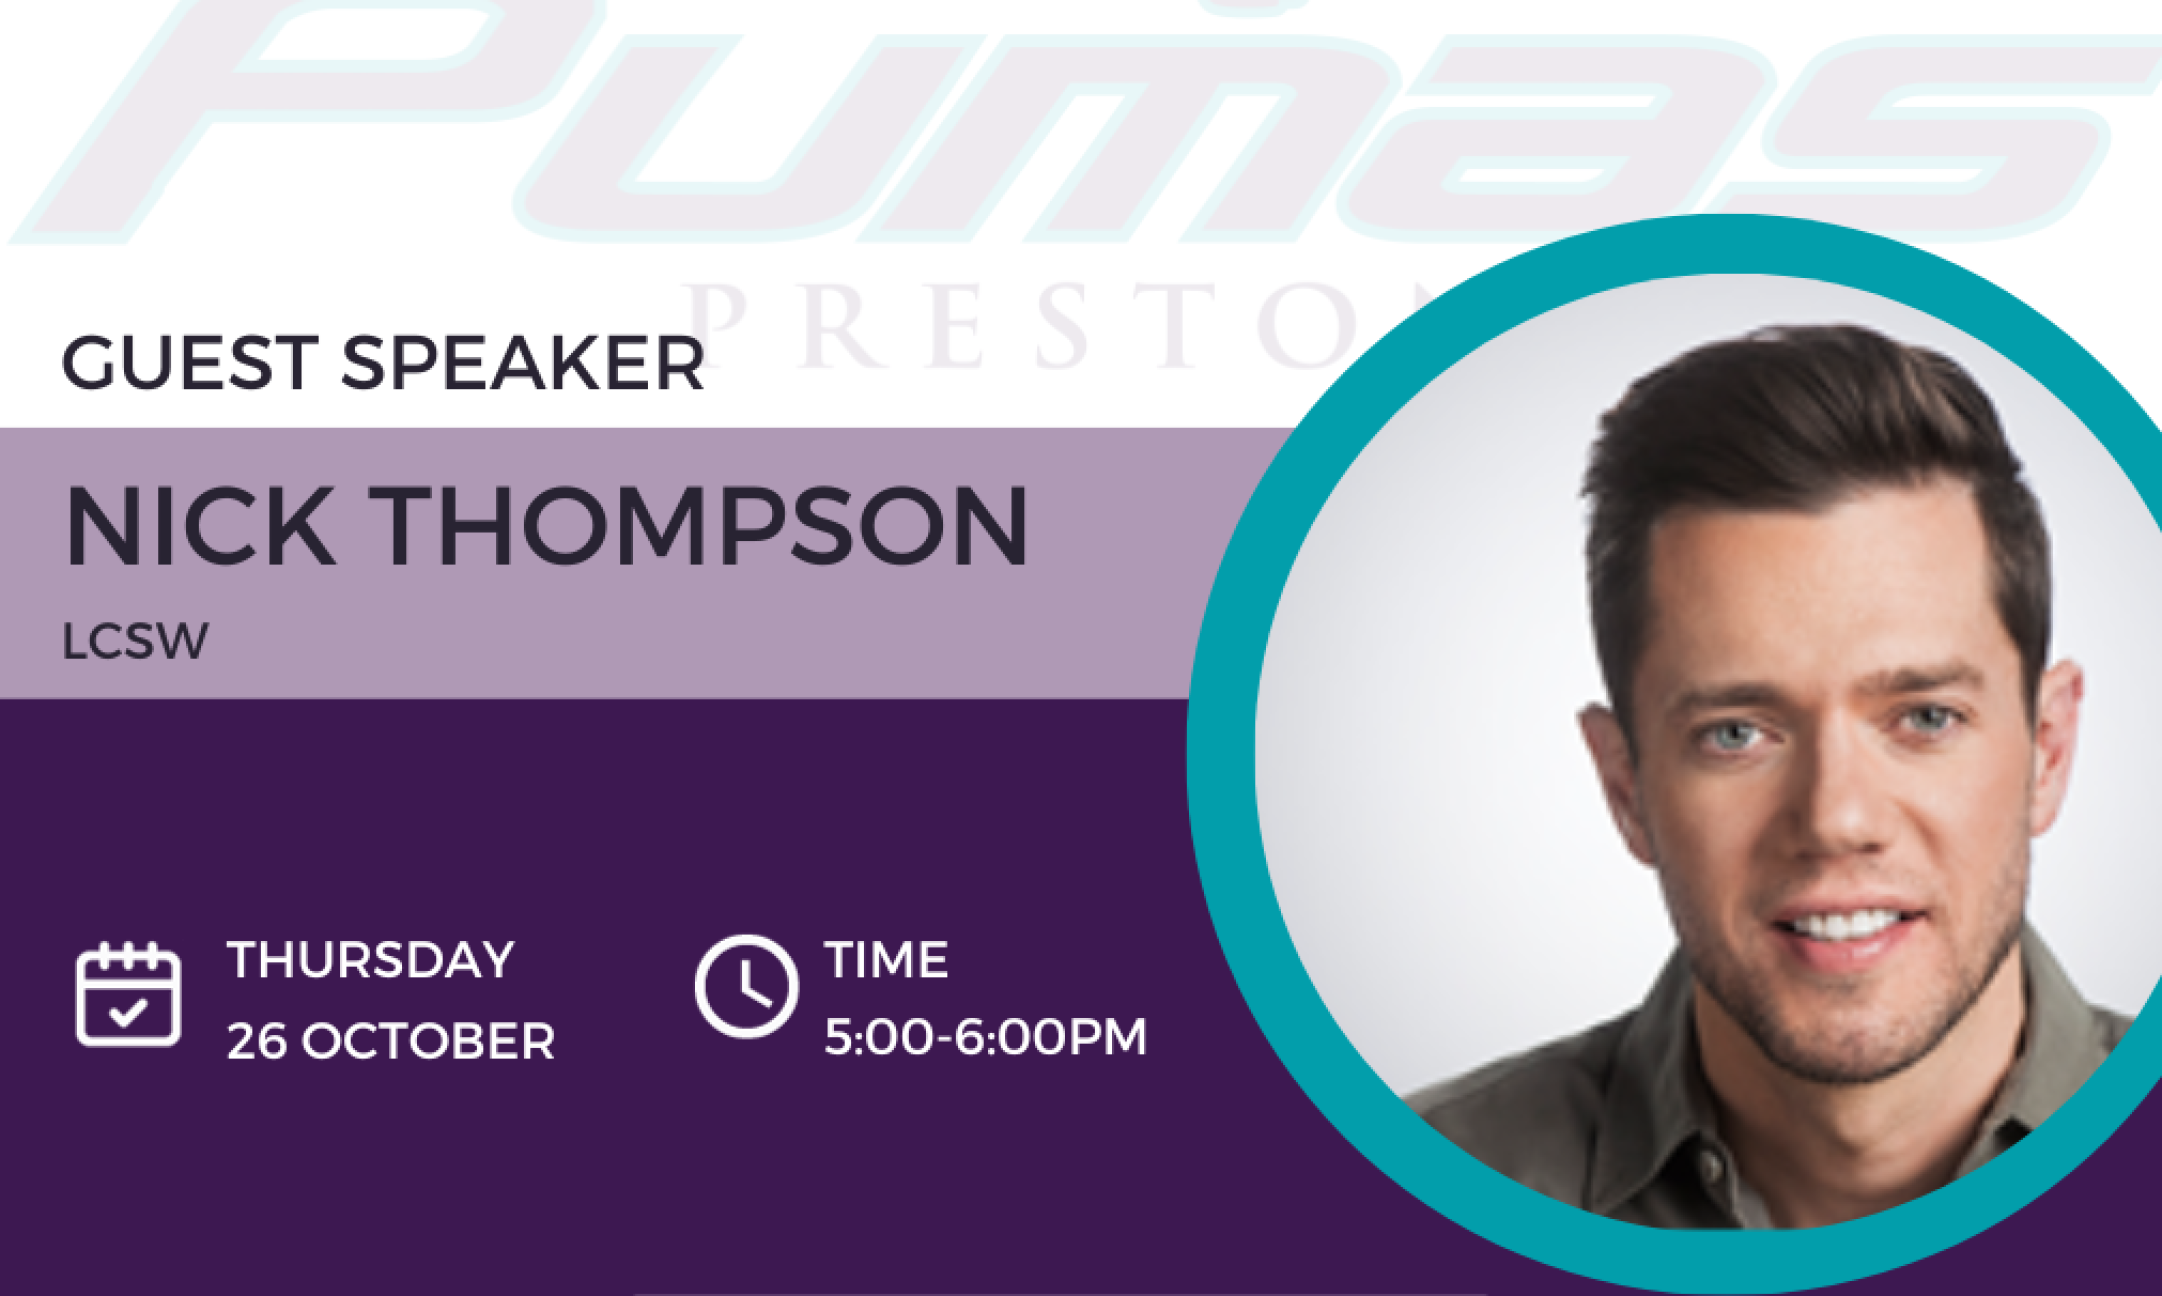 Nick Thompson Speaker Invite for Oct 26th from 5-6pm